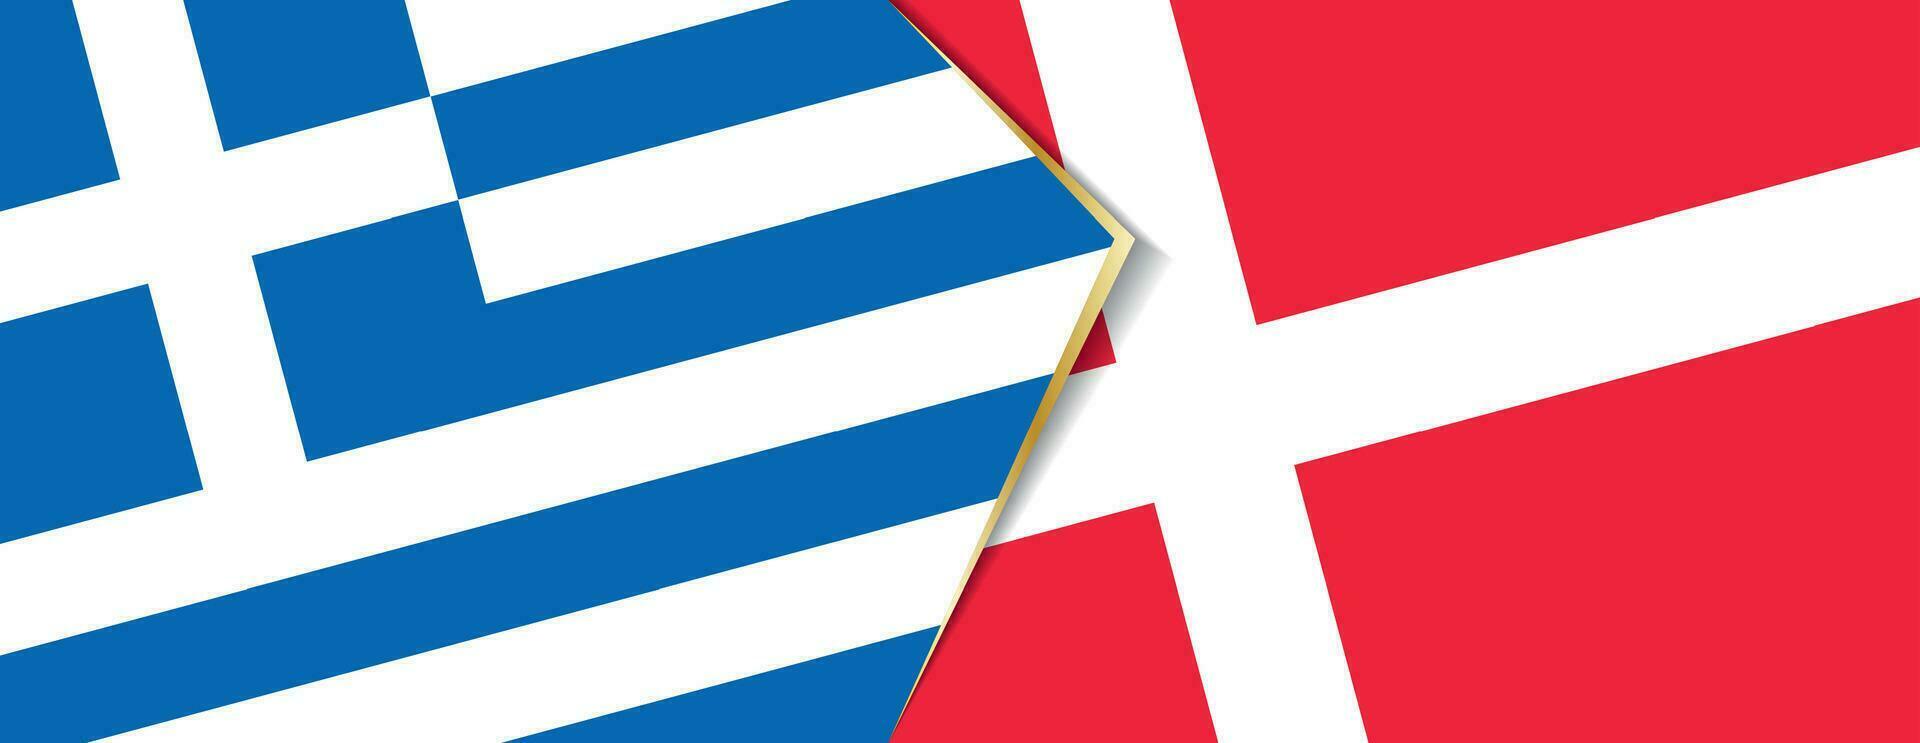 Greece and Denmark flags, two vector flags.